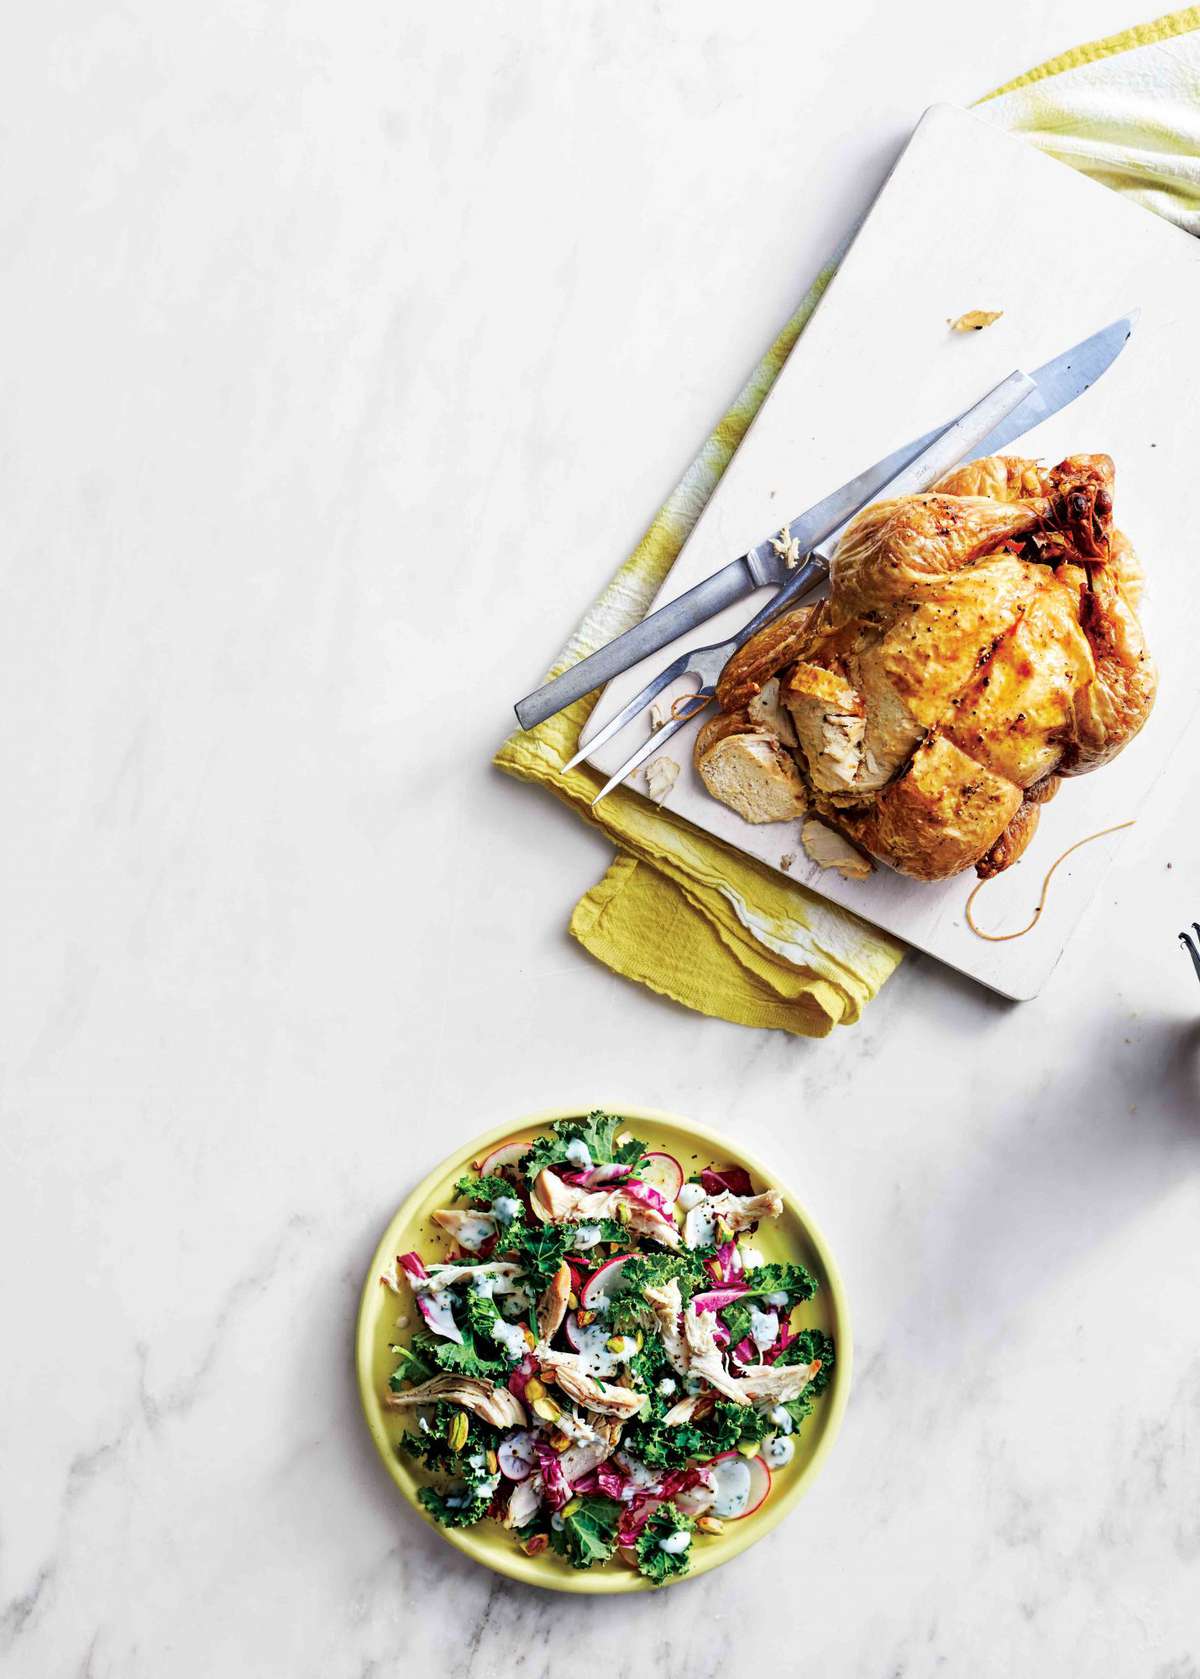 Chicken-and-Kale Salad With Herbed Buttermilk Dressing